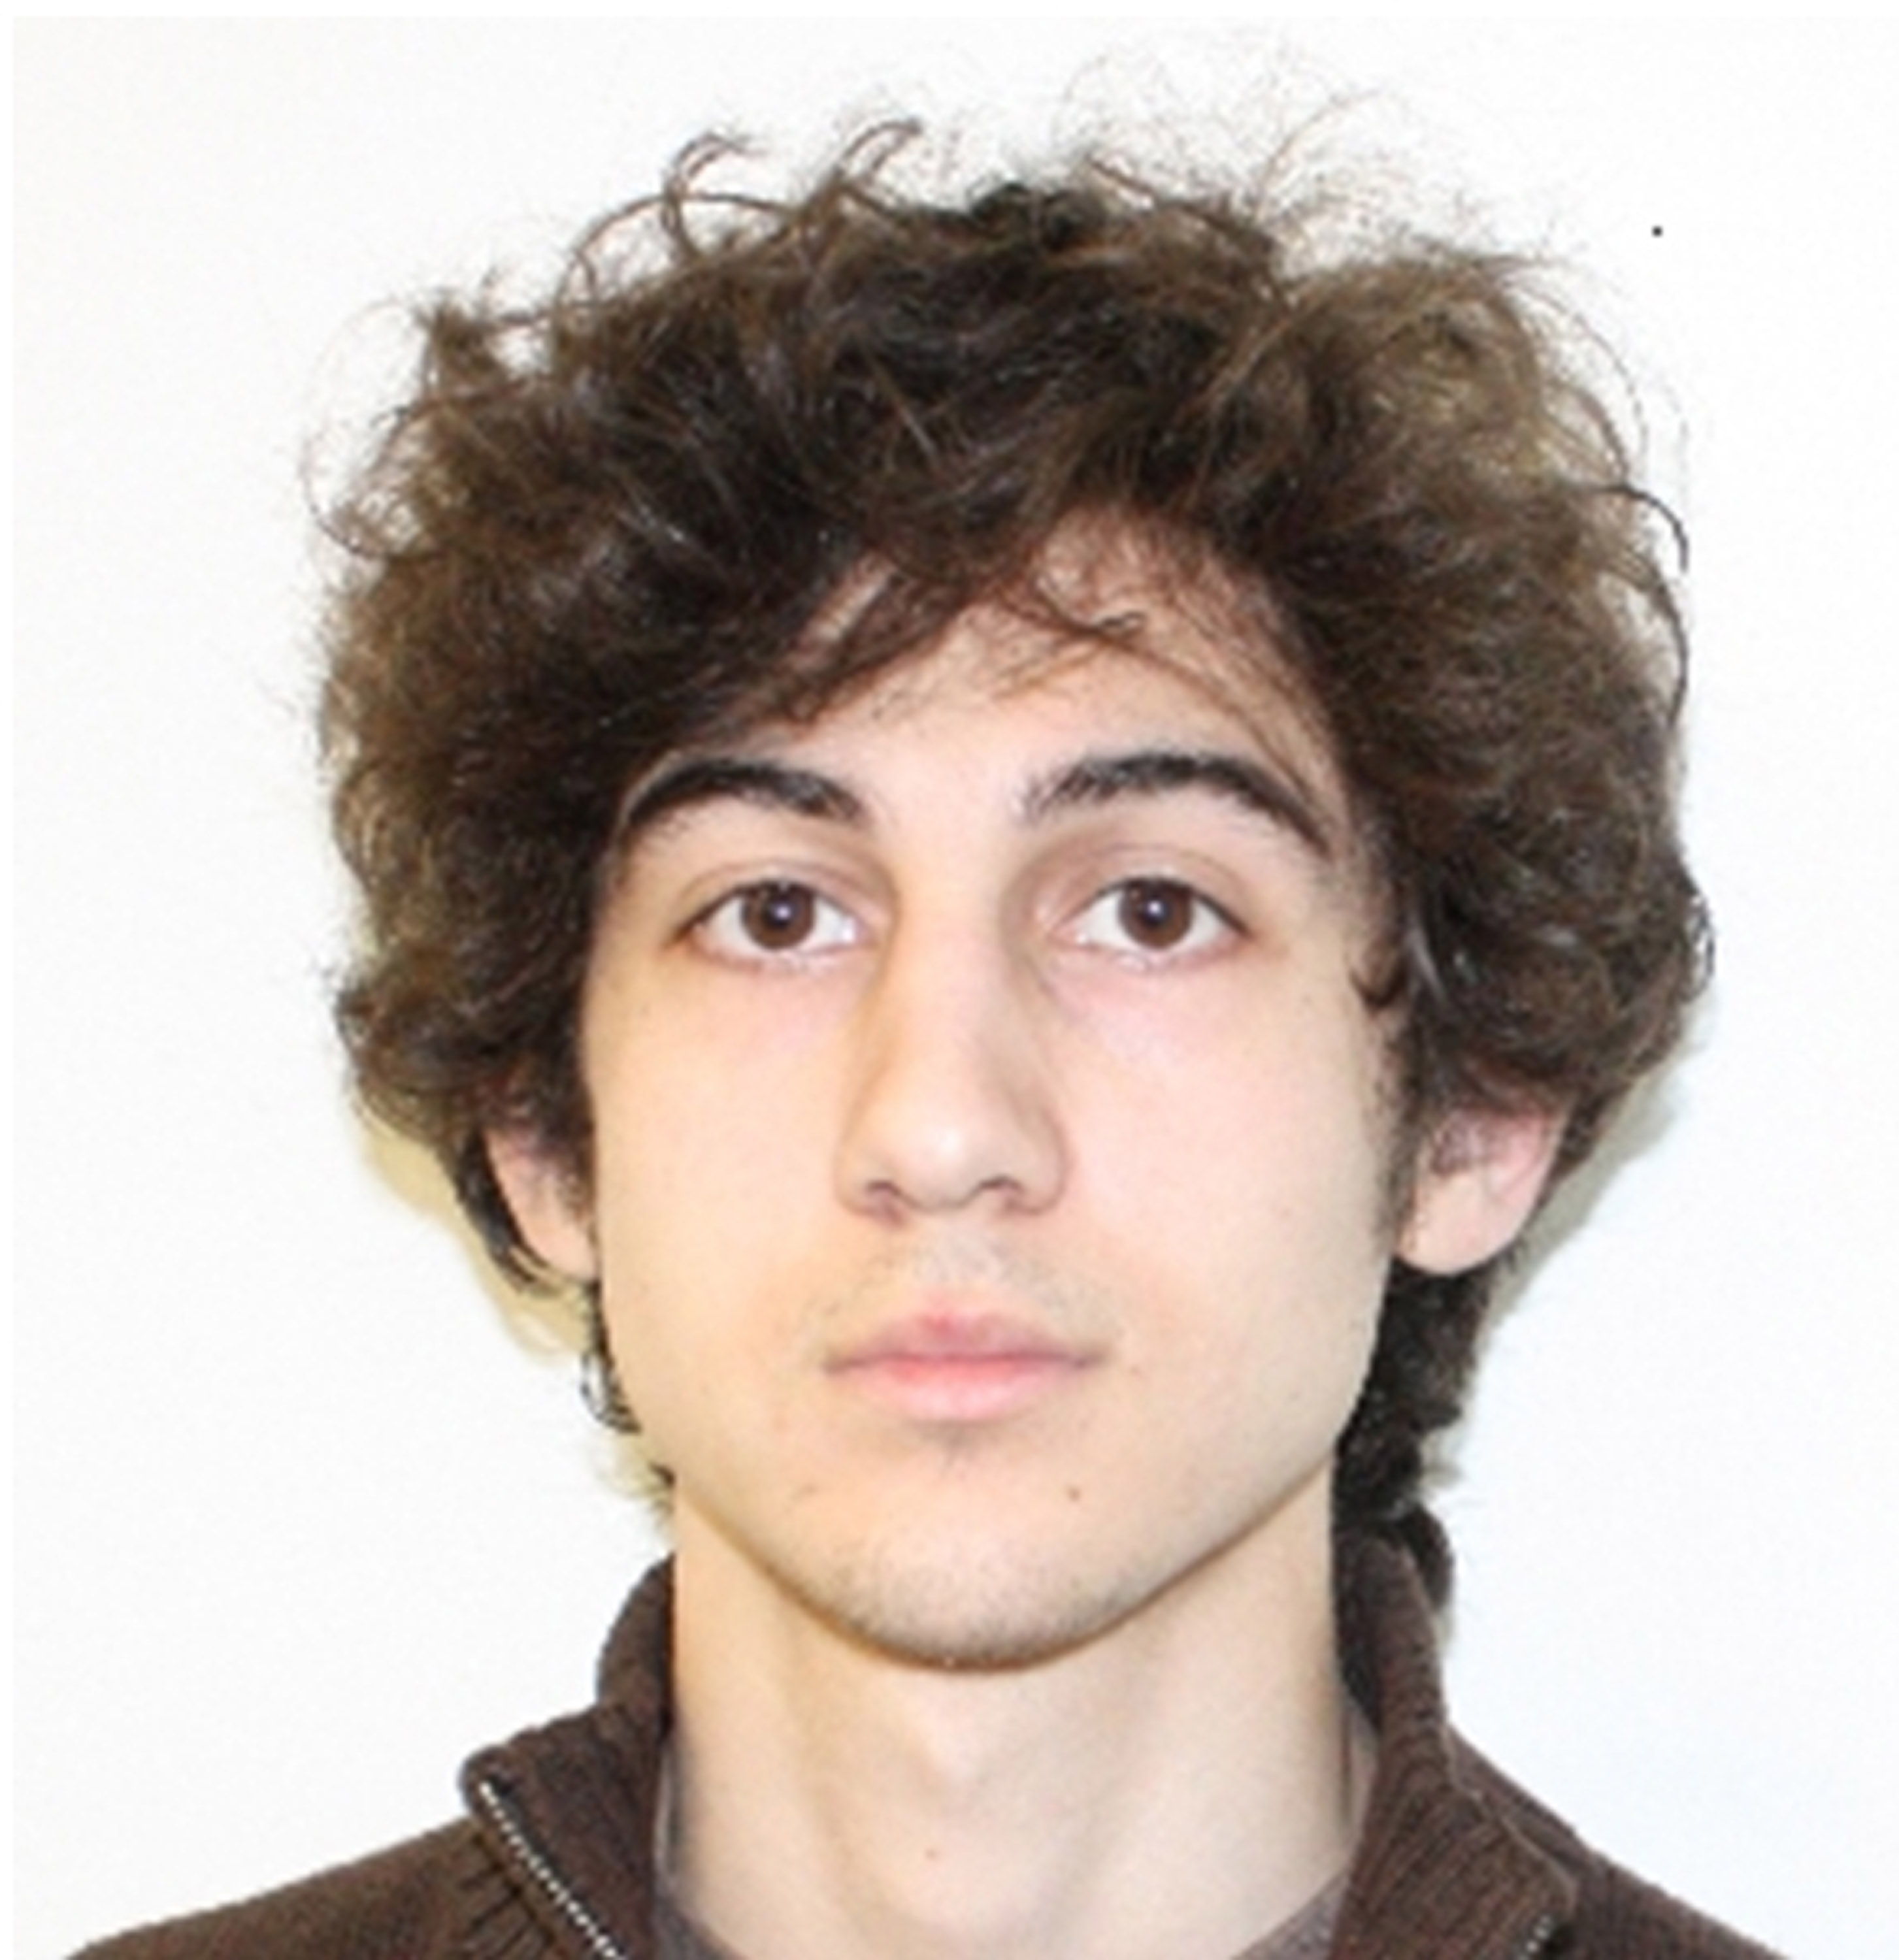 UNKNOWN - APRIL 19: In this image released by the Federal Bureau of Investigation (FBI) on April 19, 2013, Dzhokhar Tsarnaev, 19-years-old, a suspect in the Boston Marathon bombing is seen. After a car chase and shoot out with police one suspect in the Boston Marathon bombing, Tamerlan Tsarnaev, 26, was shot and killed by police early morning April 19, and a manhunt is underway for his brother and second suspect, 19-year-old suspect Dzhokhar A. Tsarnaev. The two are suspects in the bombings at the Boston Marathon on April 15, that killed three people and wounded at least 170. (Photo provided by FBI via Getty Images)